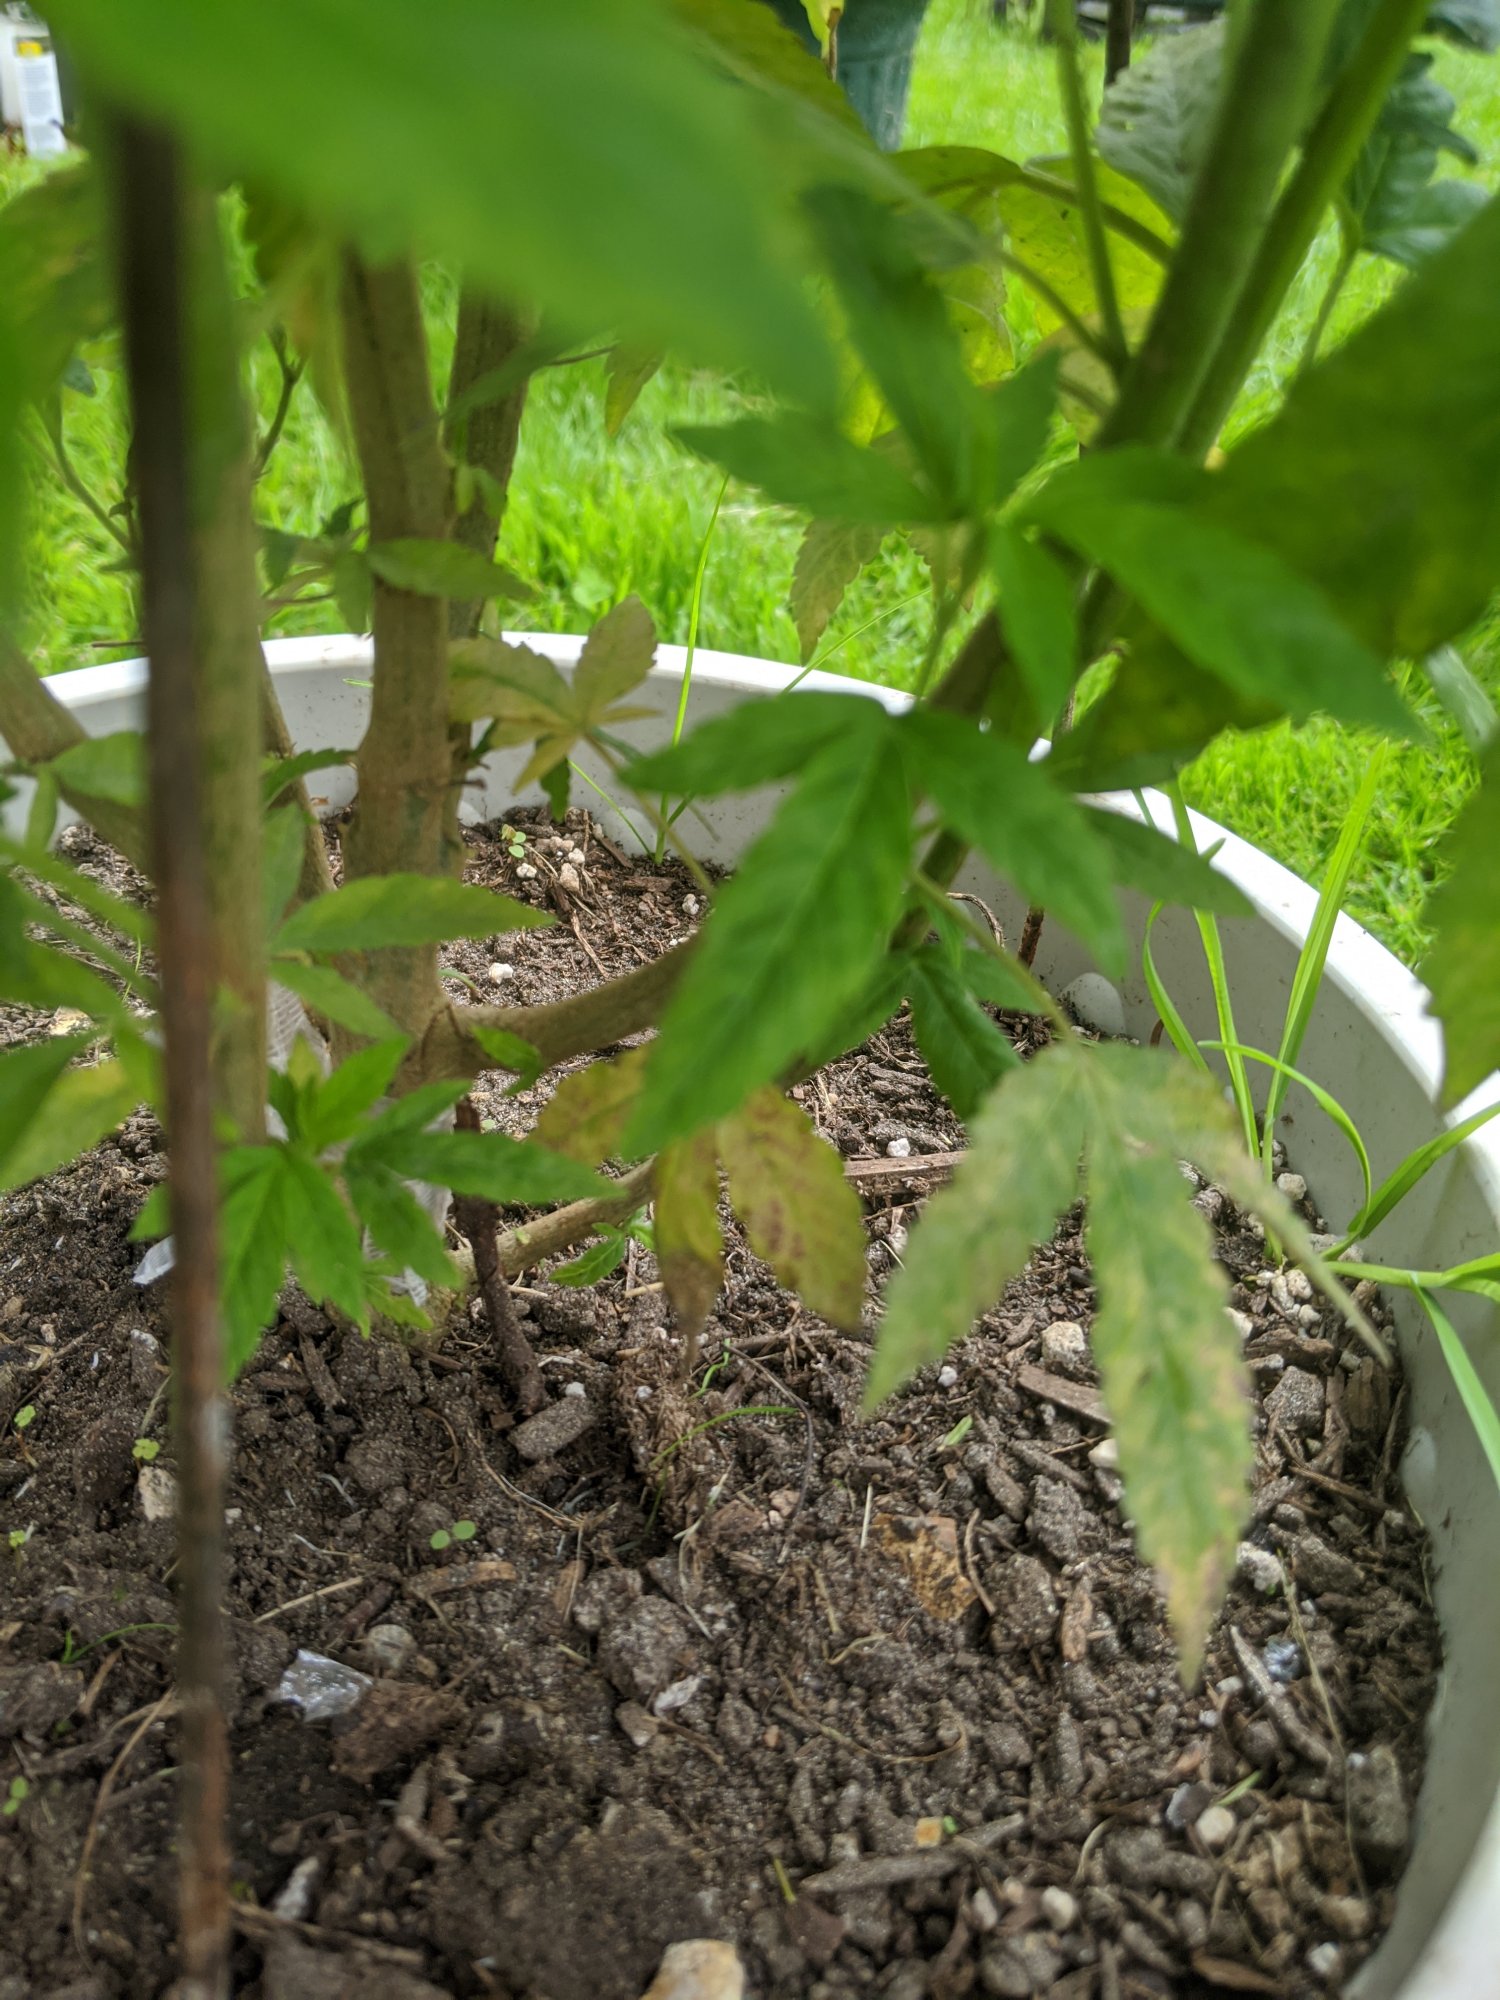 New gower outdoor having some issues 2